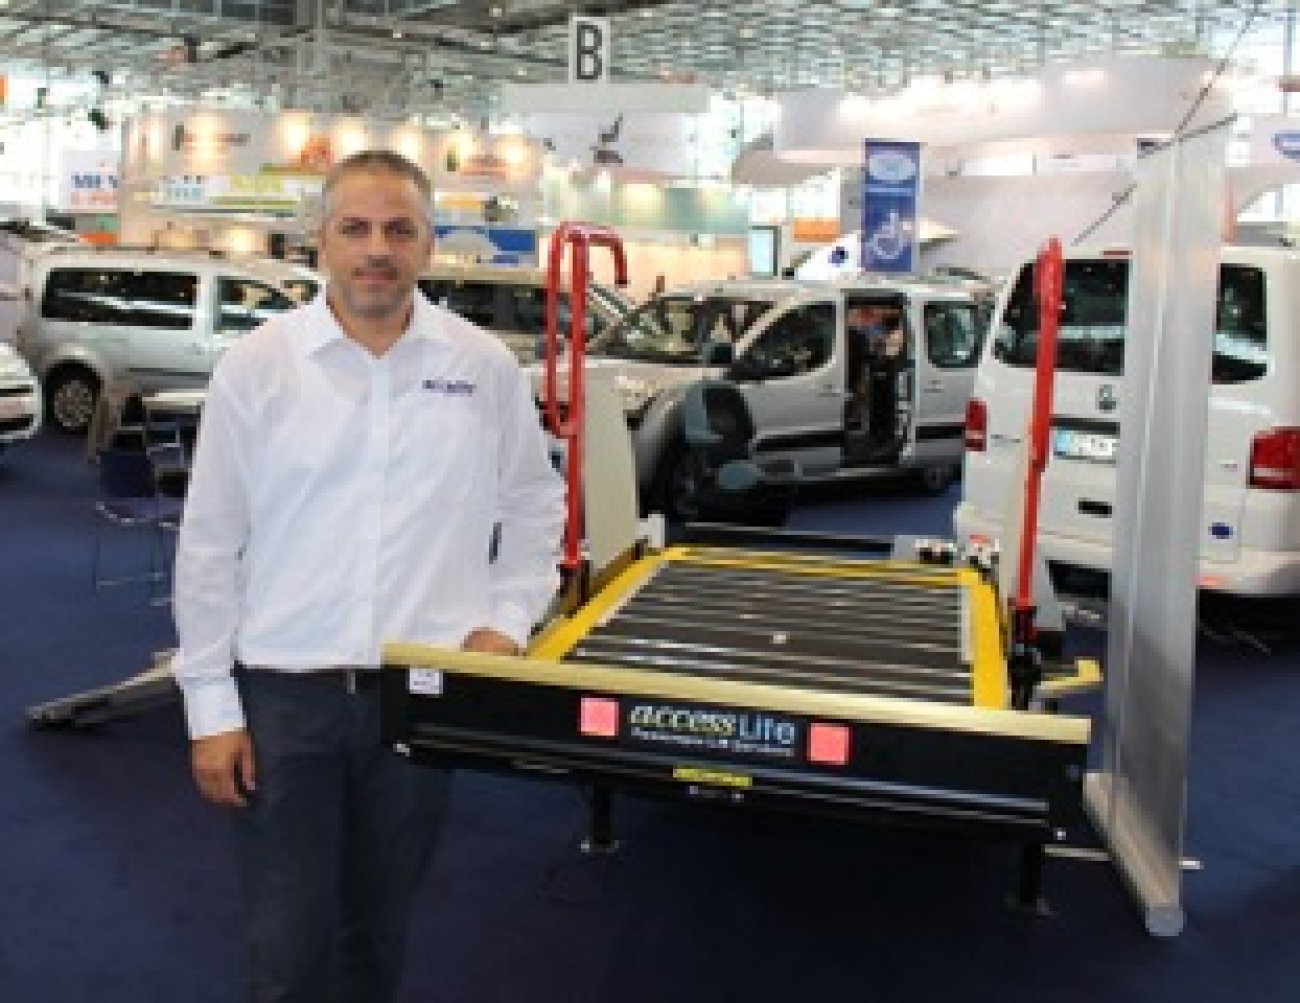 MOBILITY NETWORKS PROVIDES LAUNCHPAD FOR ULTRA-THIN VEHICLE ACCESS LIFT AND ELECTRONIC VEHICLE CONTROLS AT MOBILITY ROADSHOW